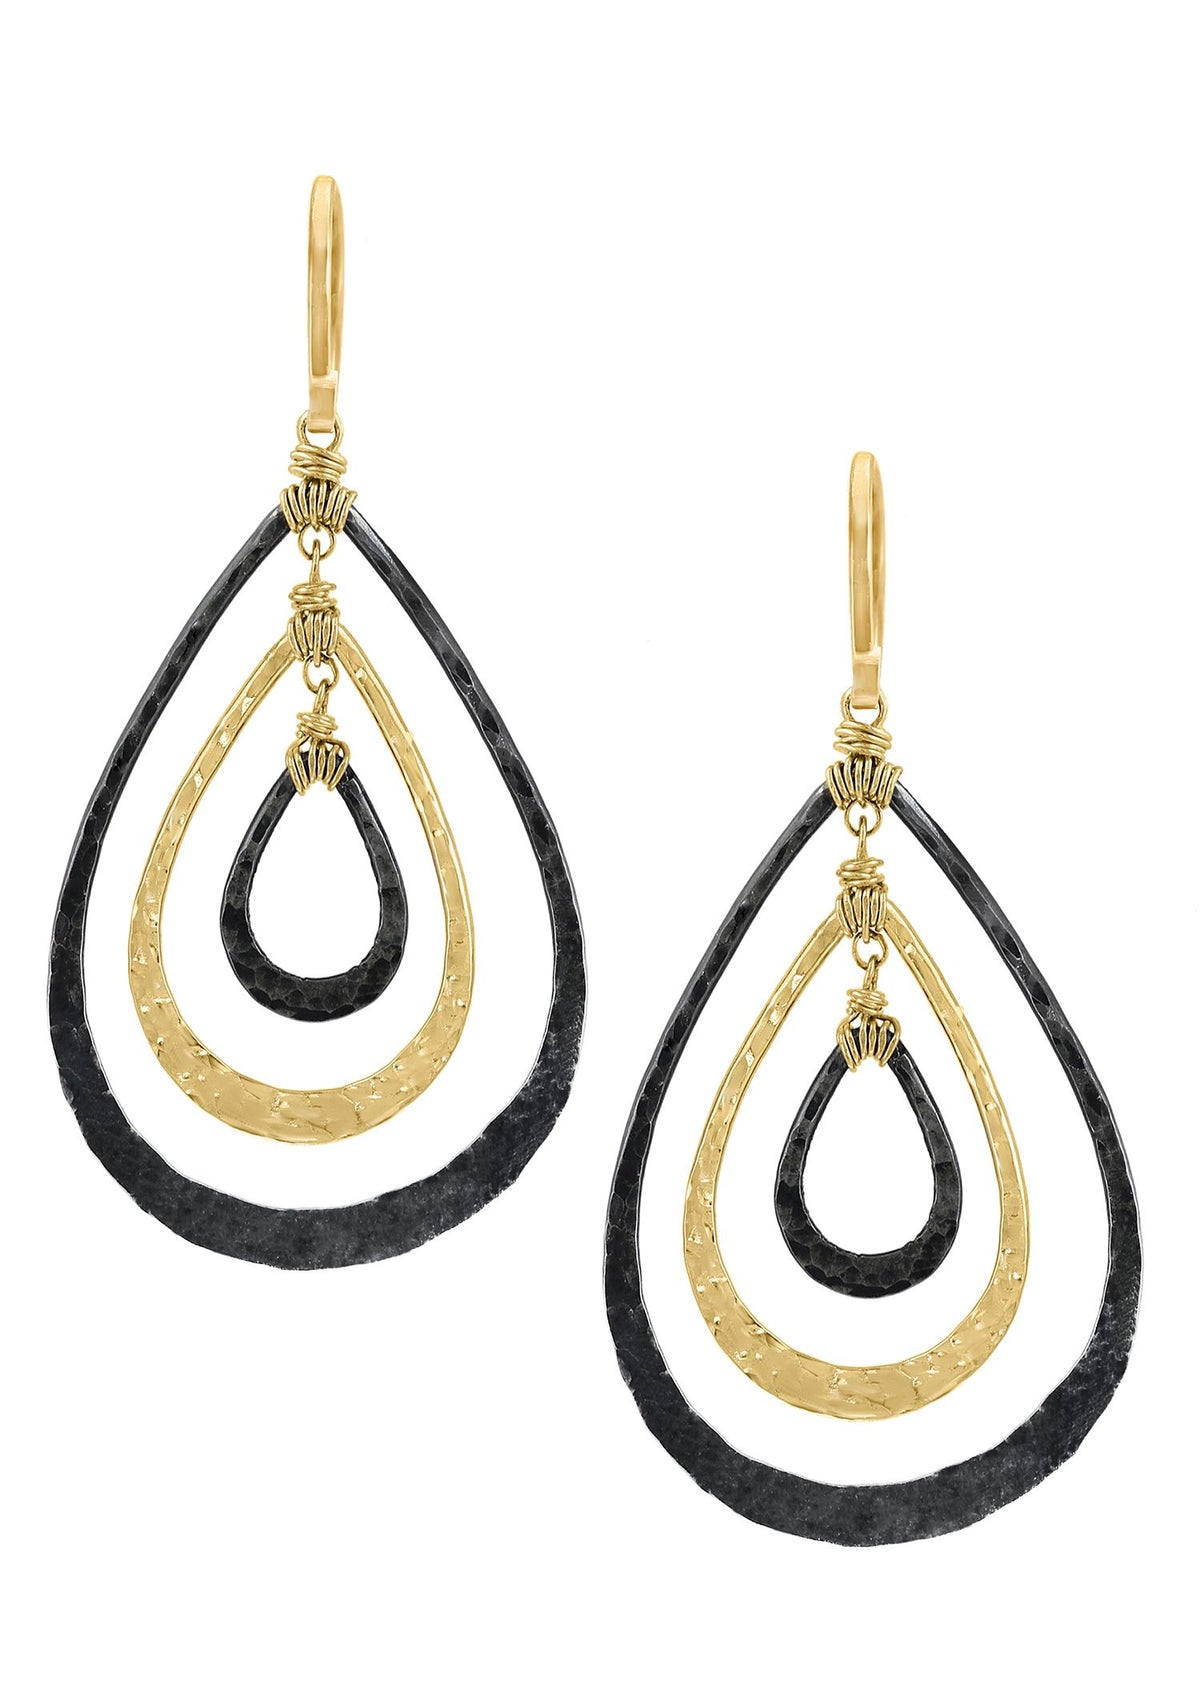 14k gold fill Blackened sterling silver Mixed metal Earrings measure 1-3/4&quot; in length (including the ear wires) and 7/8&quot; in width Handmade in our Los Angeles studio